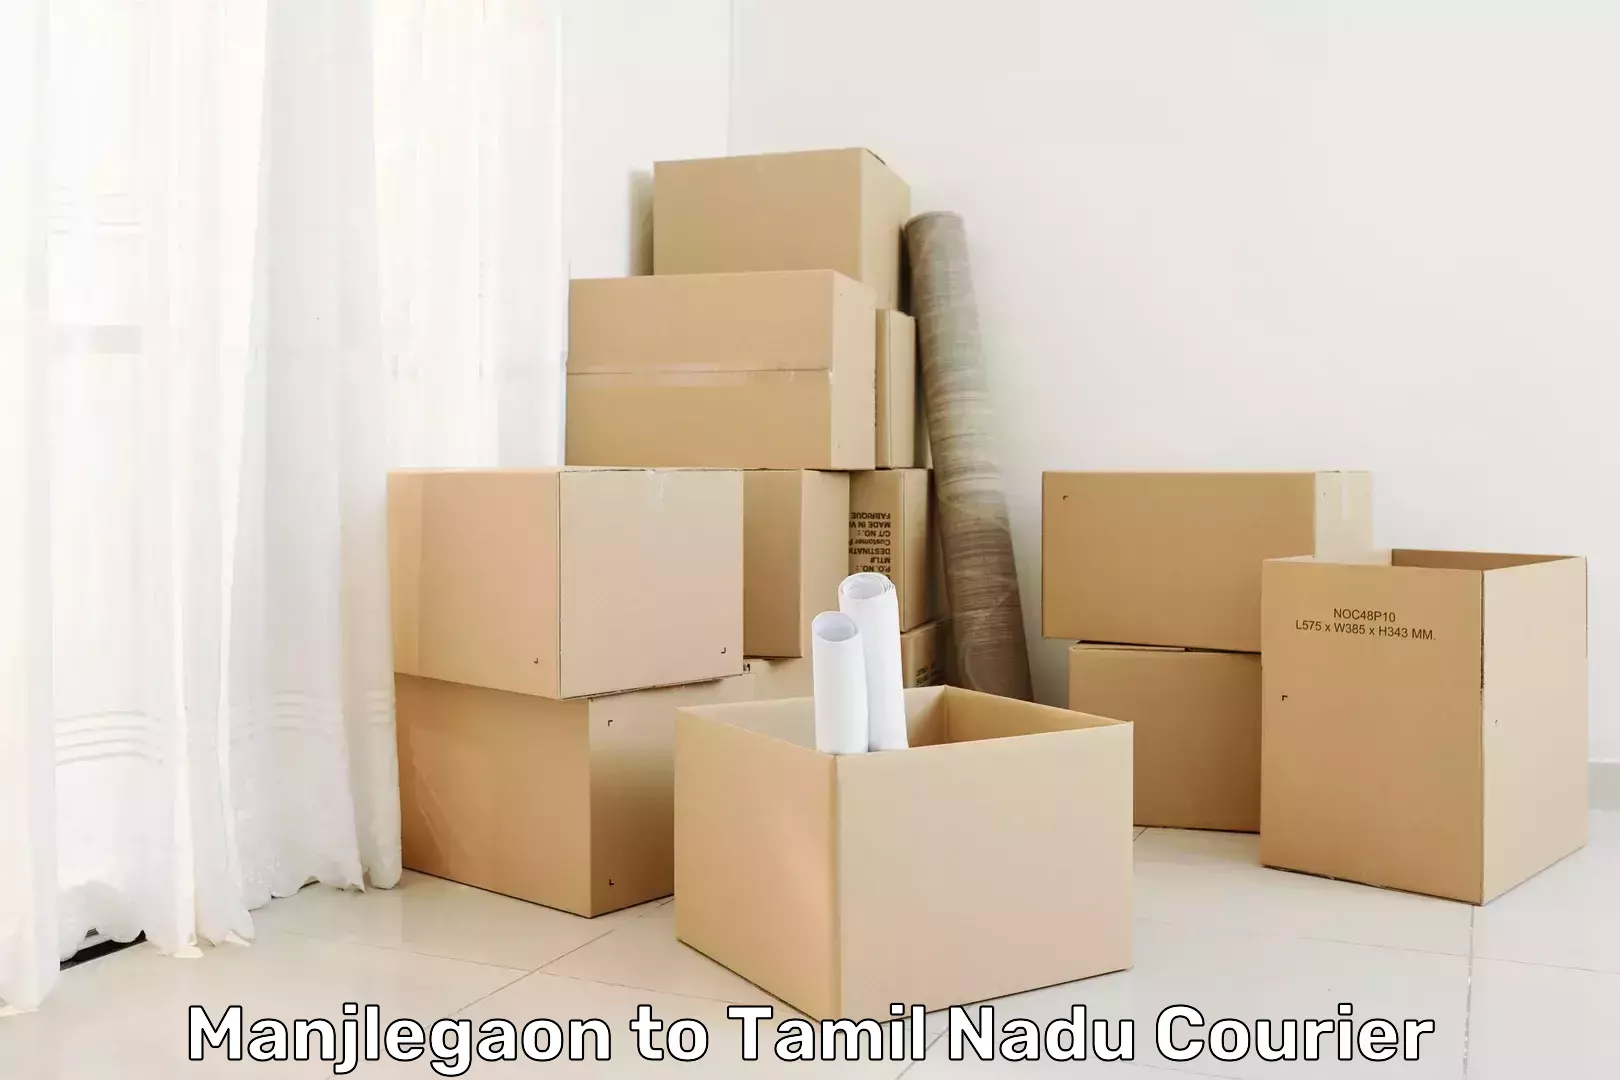 Personal courier services Manjlegaon to Omalur